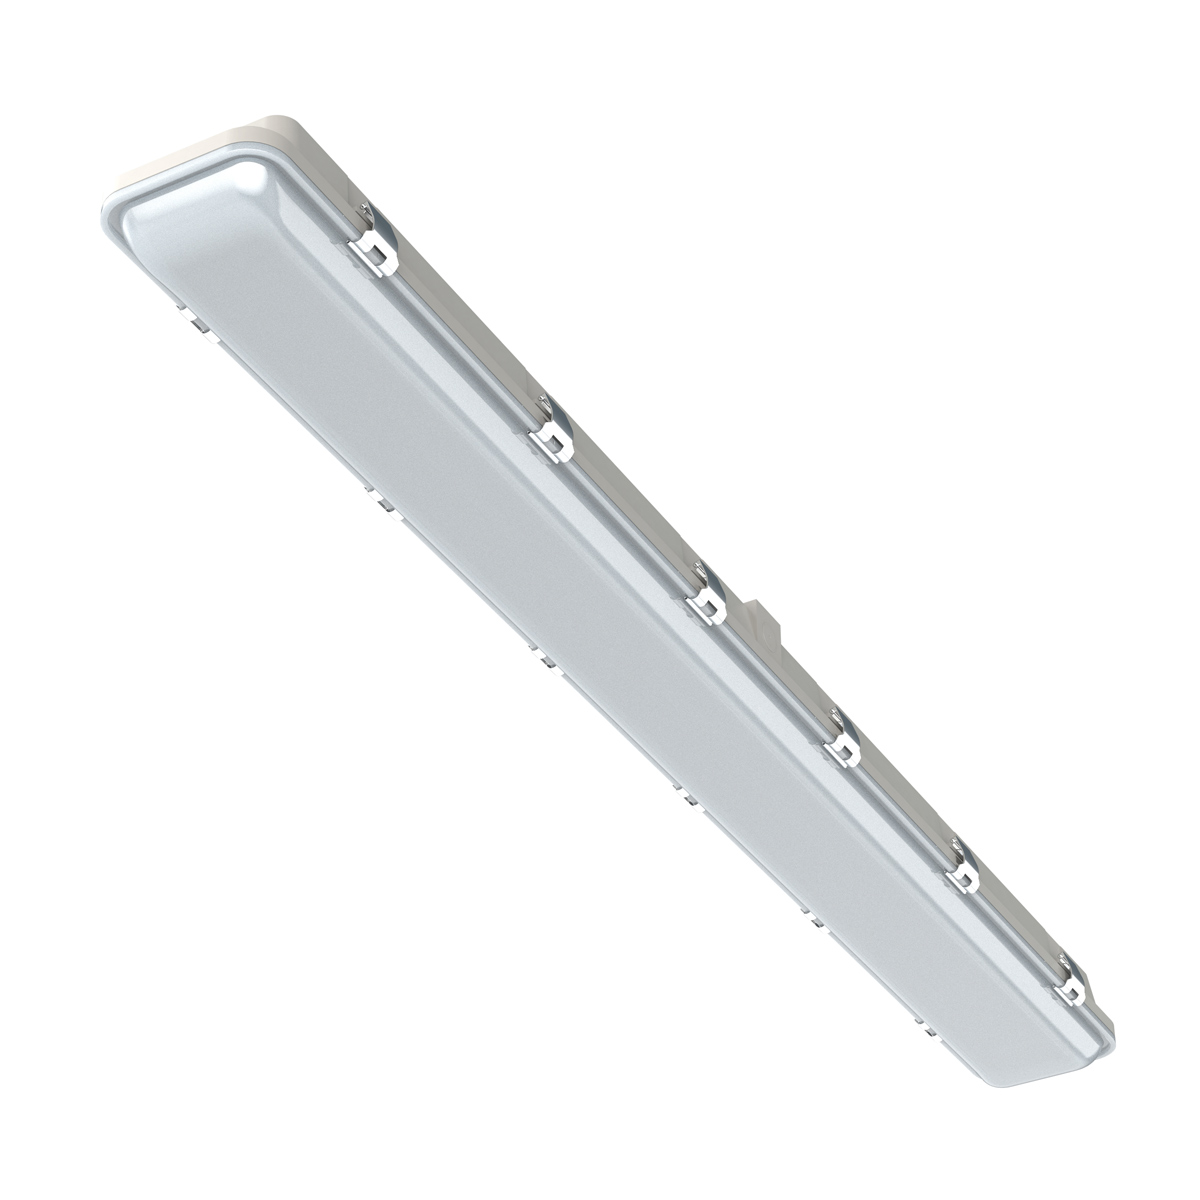 View 60w NCF IP65 LED Batten 6FT with Emergency Module 180CM information